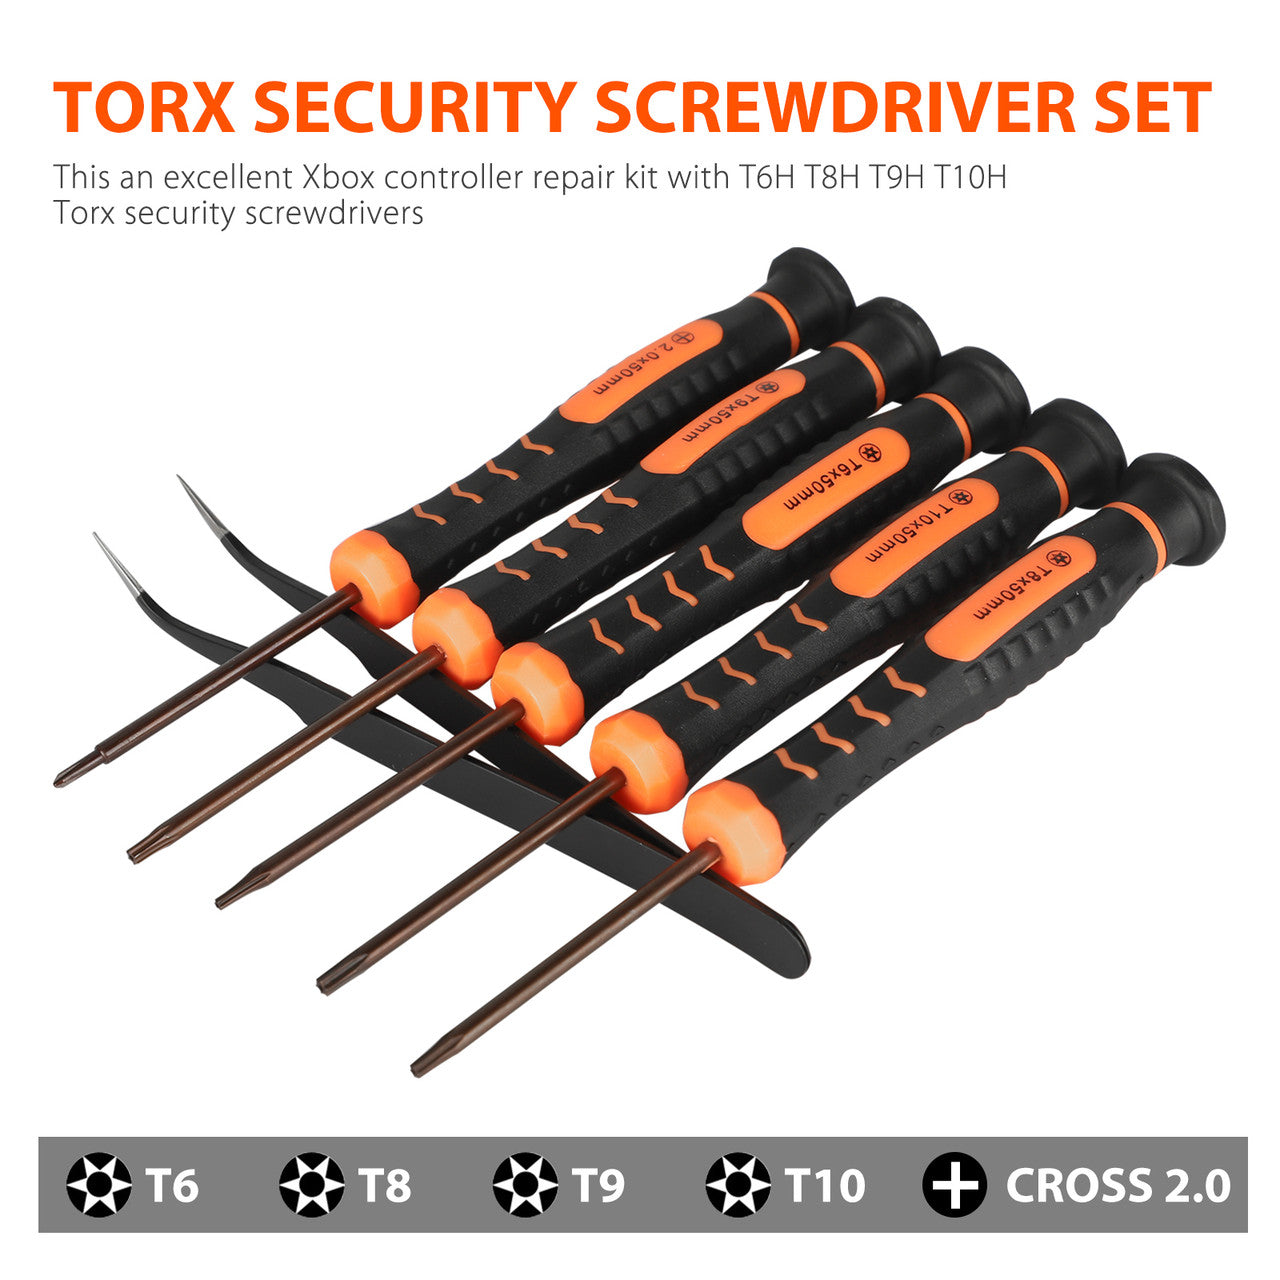 T6 T8 T9 T10 Torx Security Screwdriver Set, Repair Kit for Xbox One Xbox 360 Controller and PS3 PS4 Controller, 10Pcs